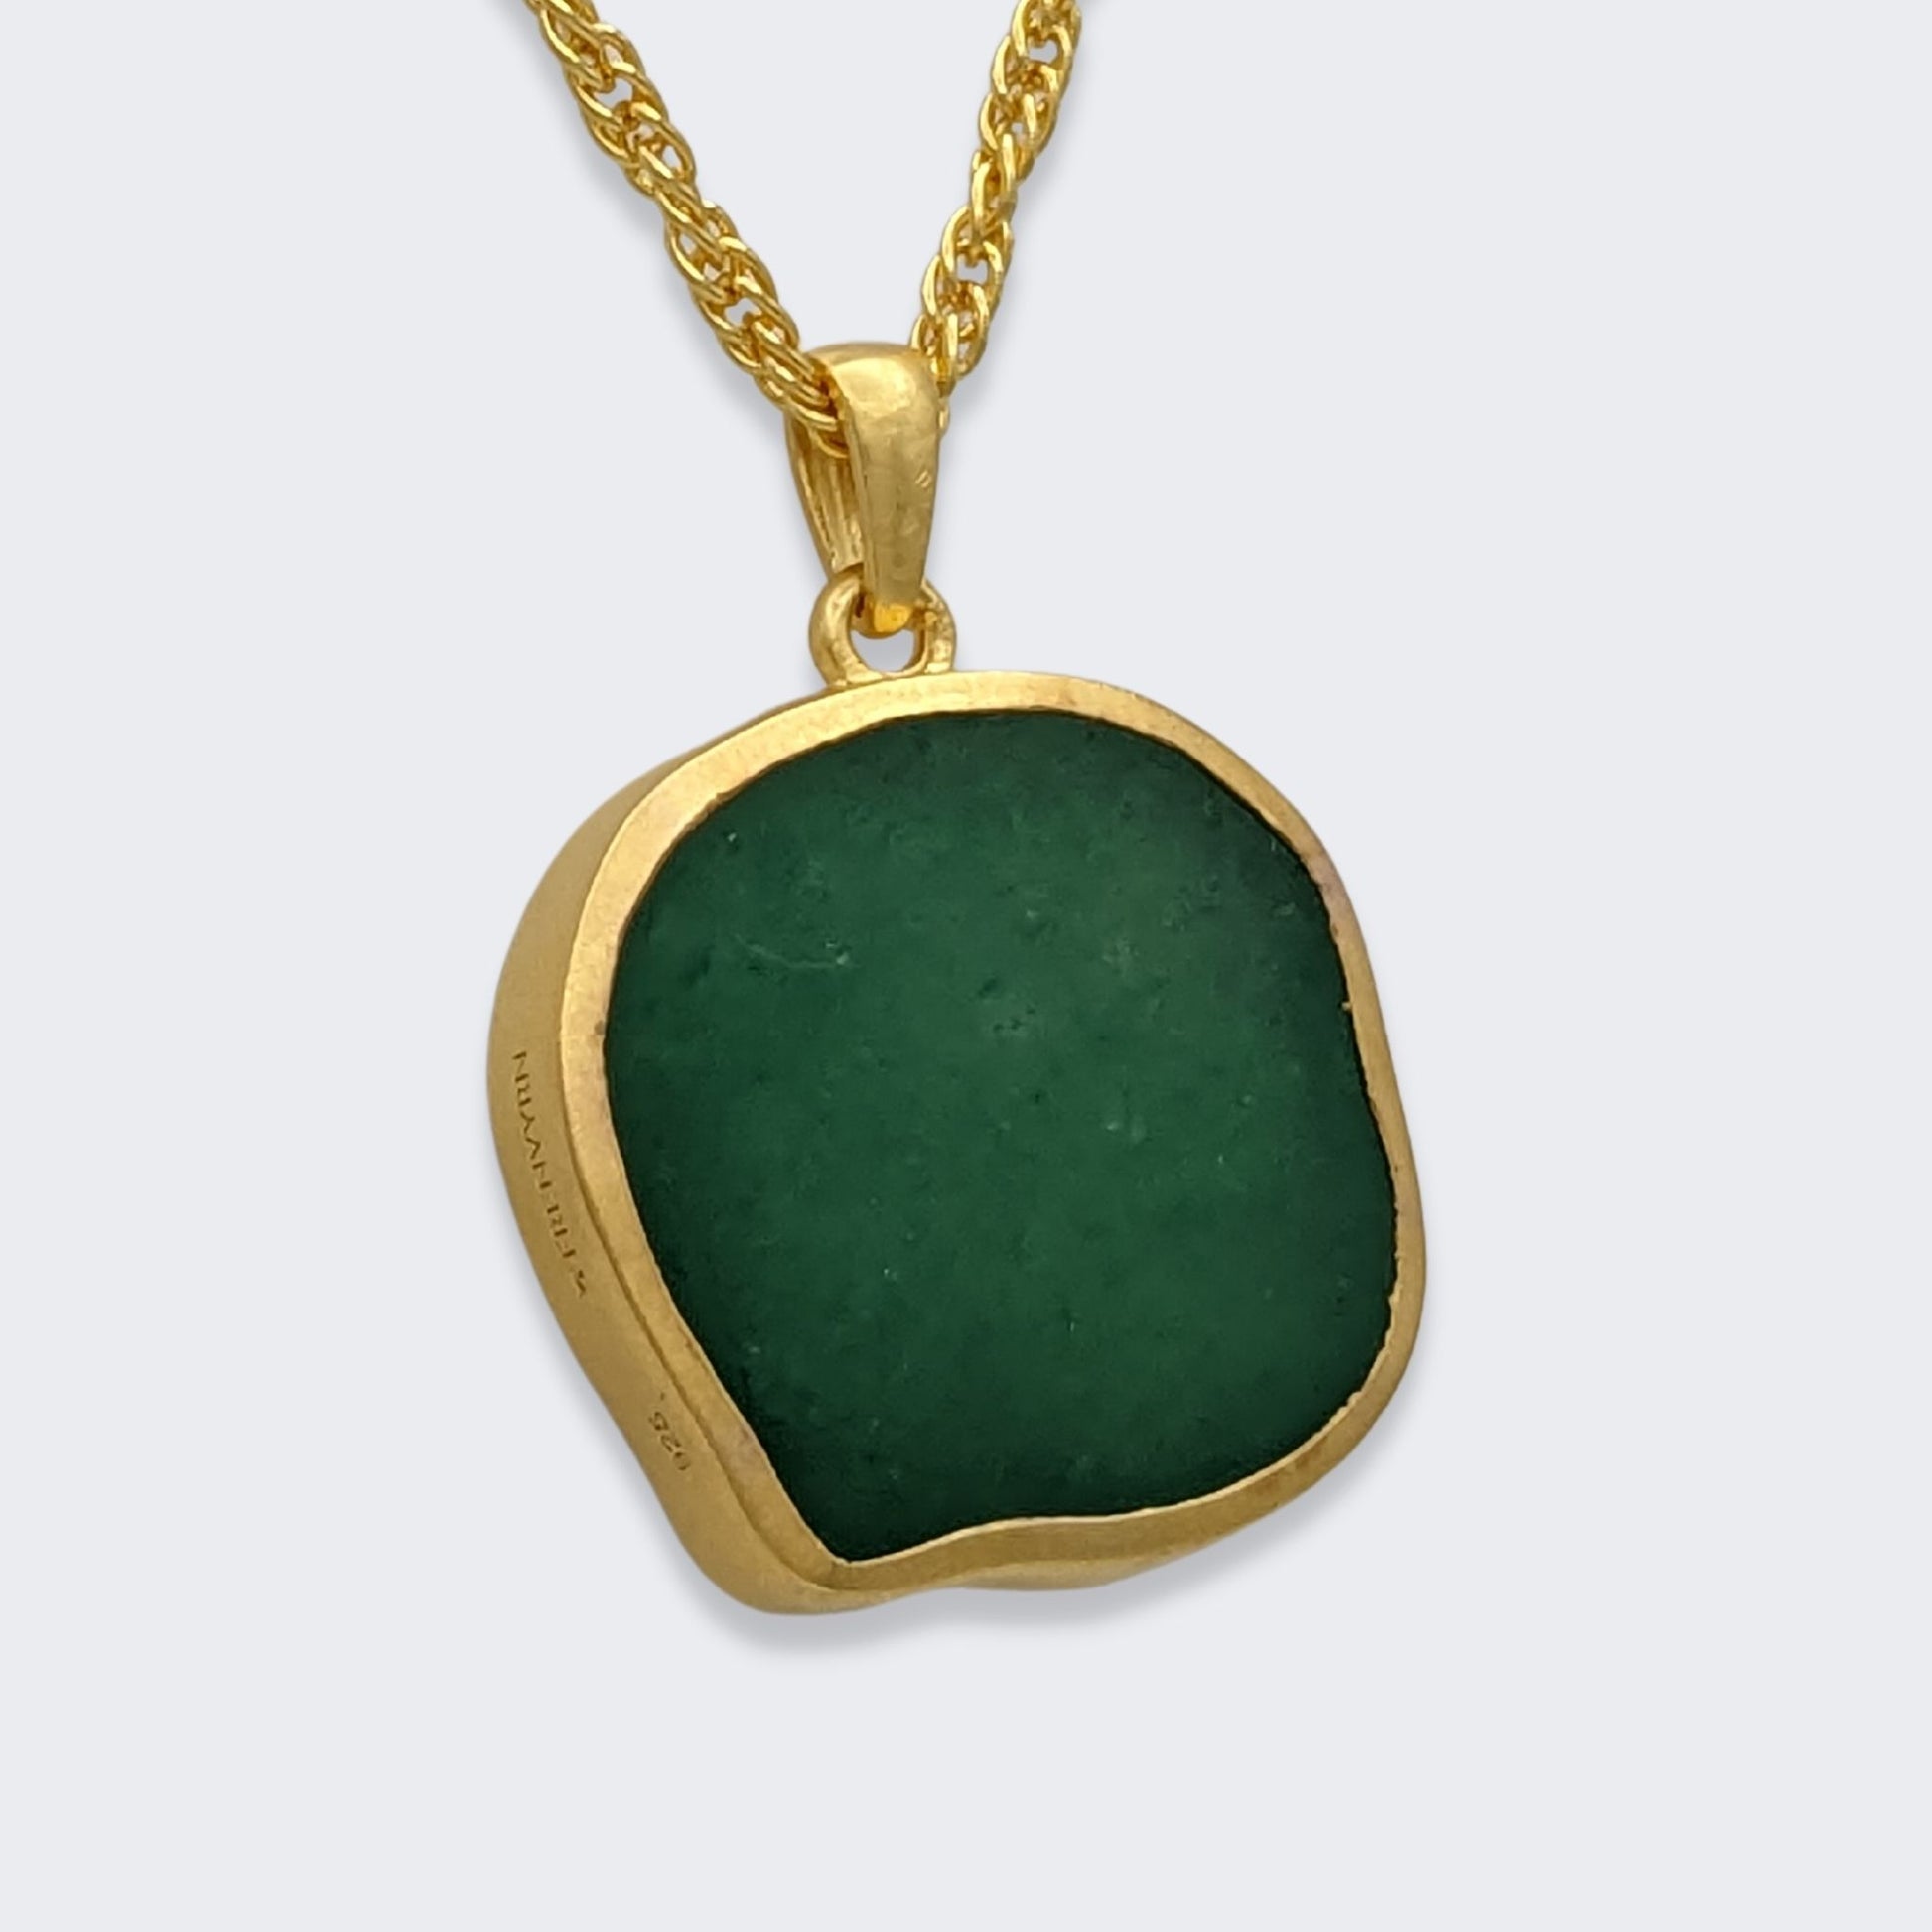 lars reversible cat coin necklace in 18k gold vermeil reversed (back view), green aventurine